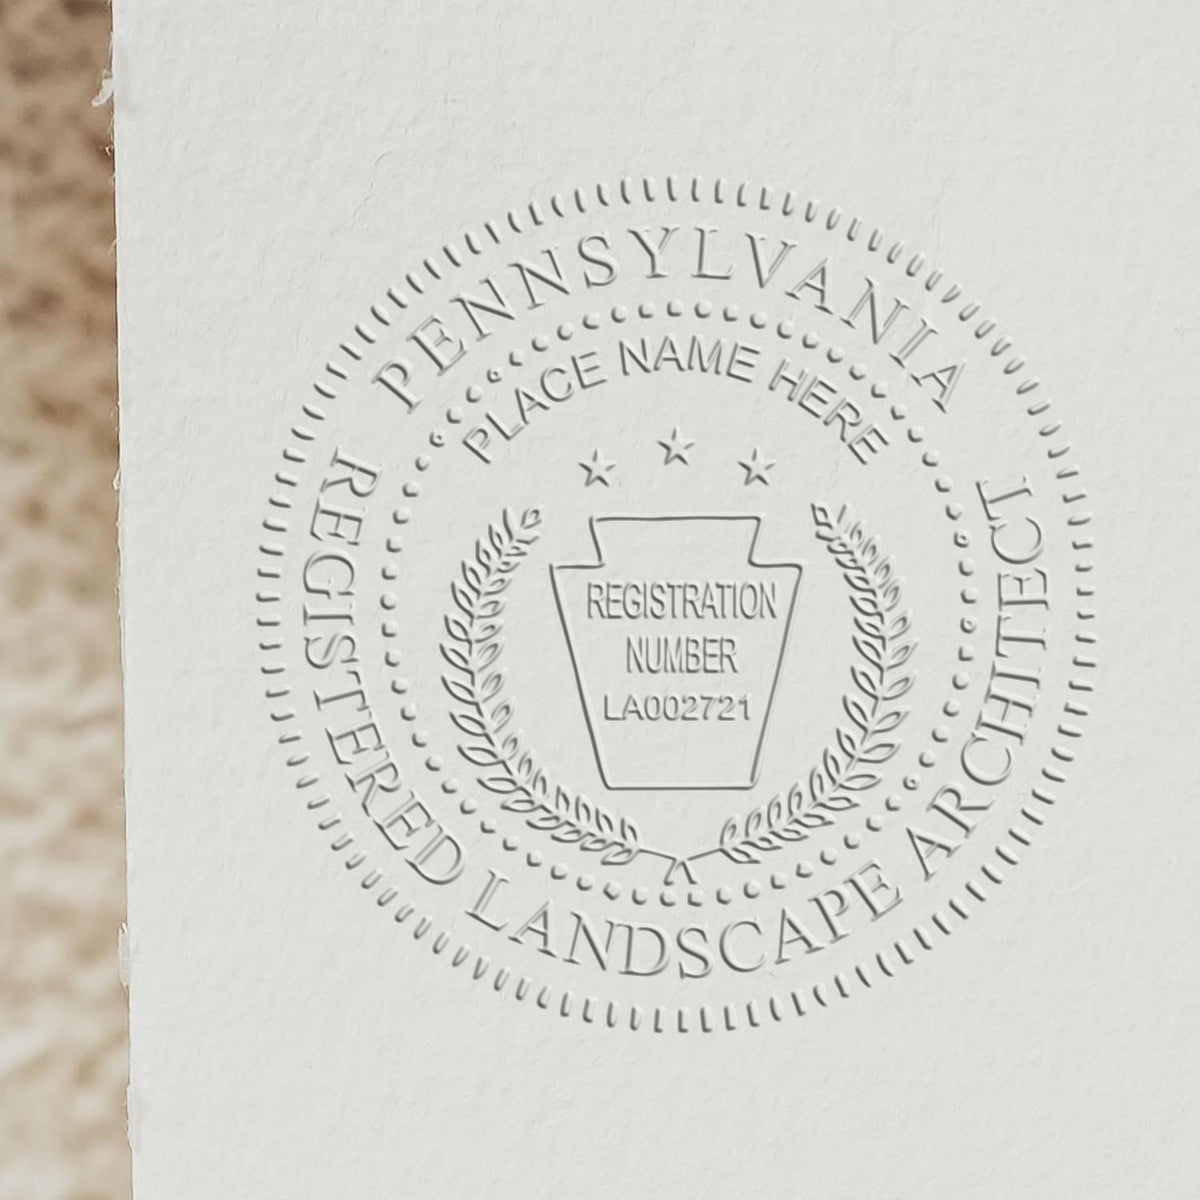 A stamped imprint of the Gift Pennsylvania Landscape Architect Seal in this stylish lifestyle photo, setting the tone for a unique and personalized product.